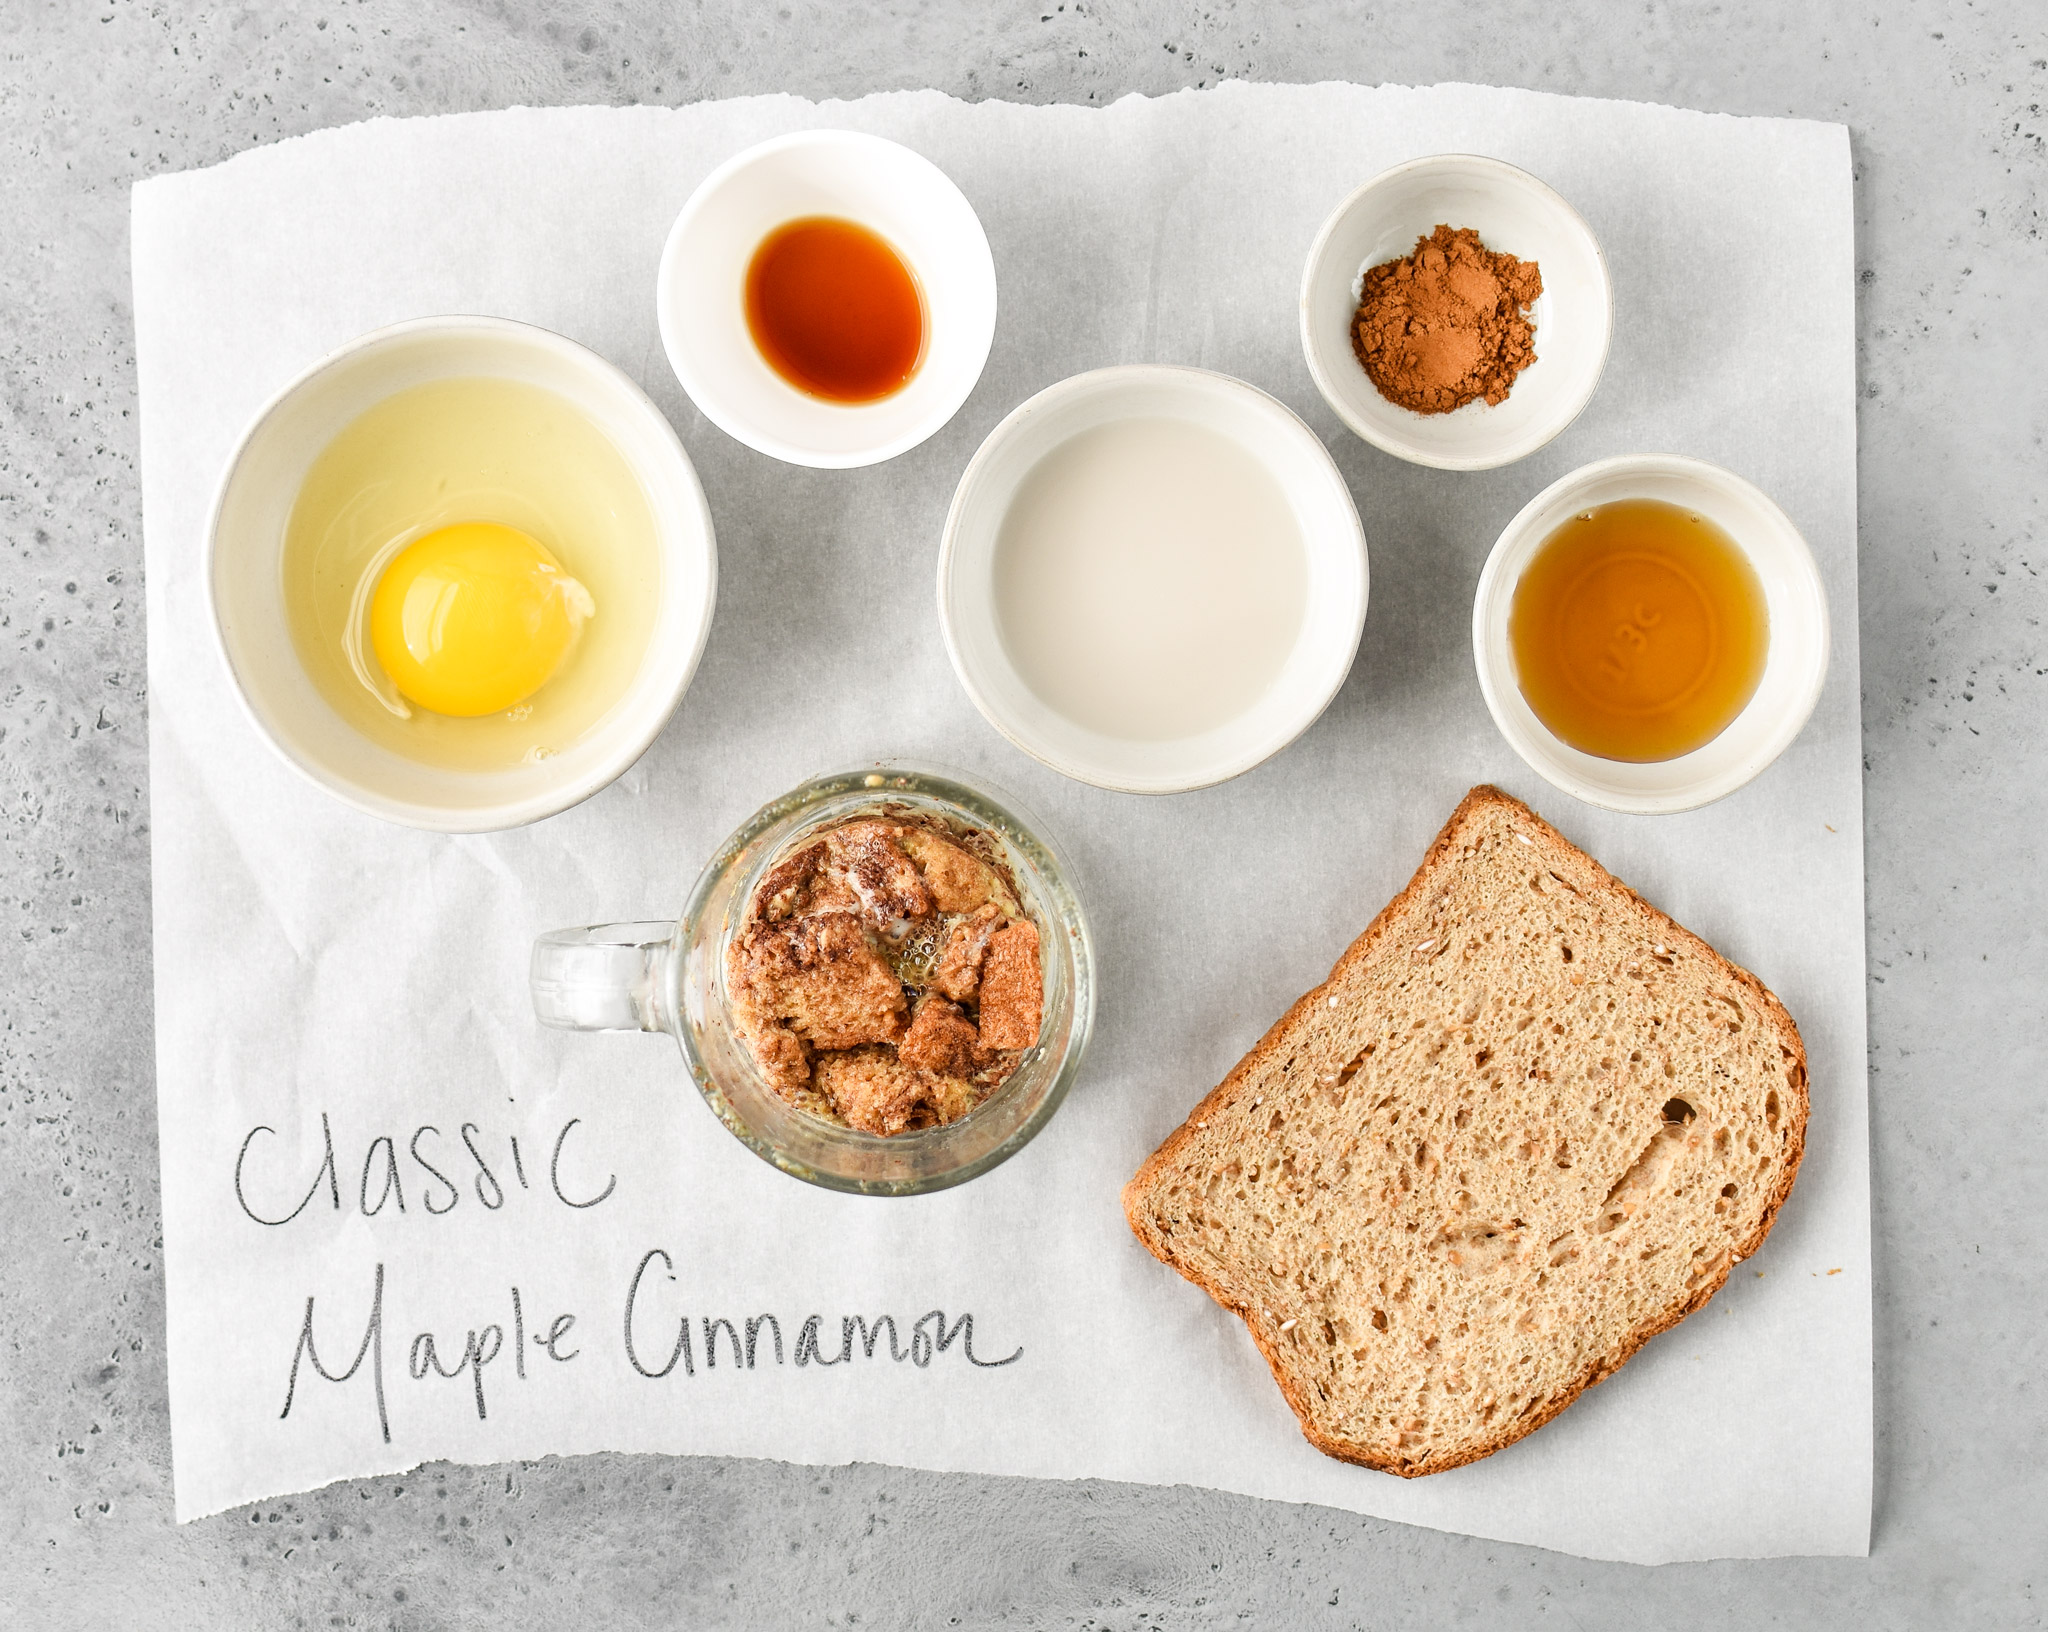 Ingredients for classic maple cinnamon microwave mug french toast